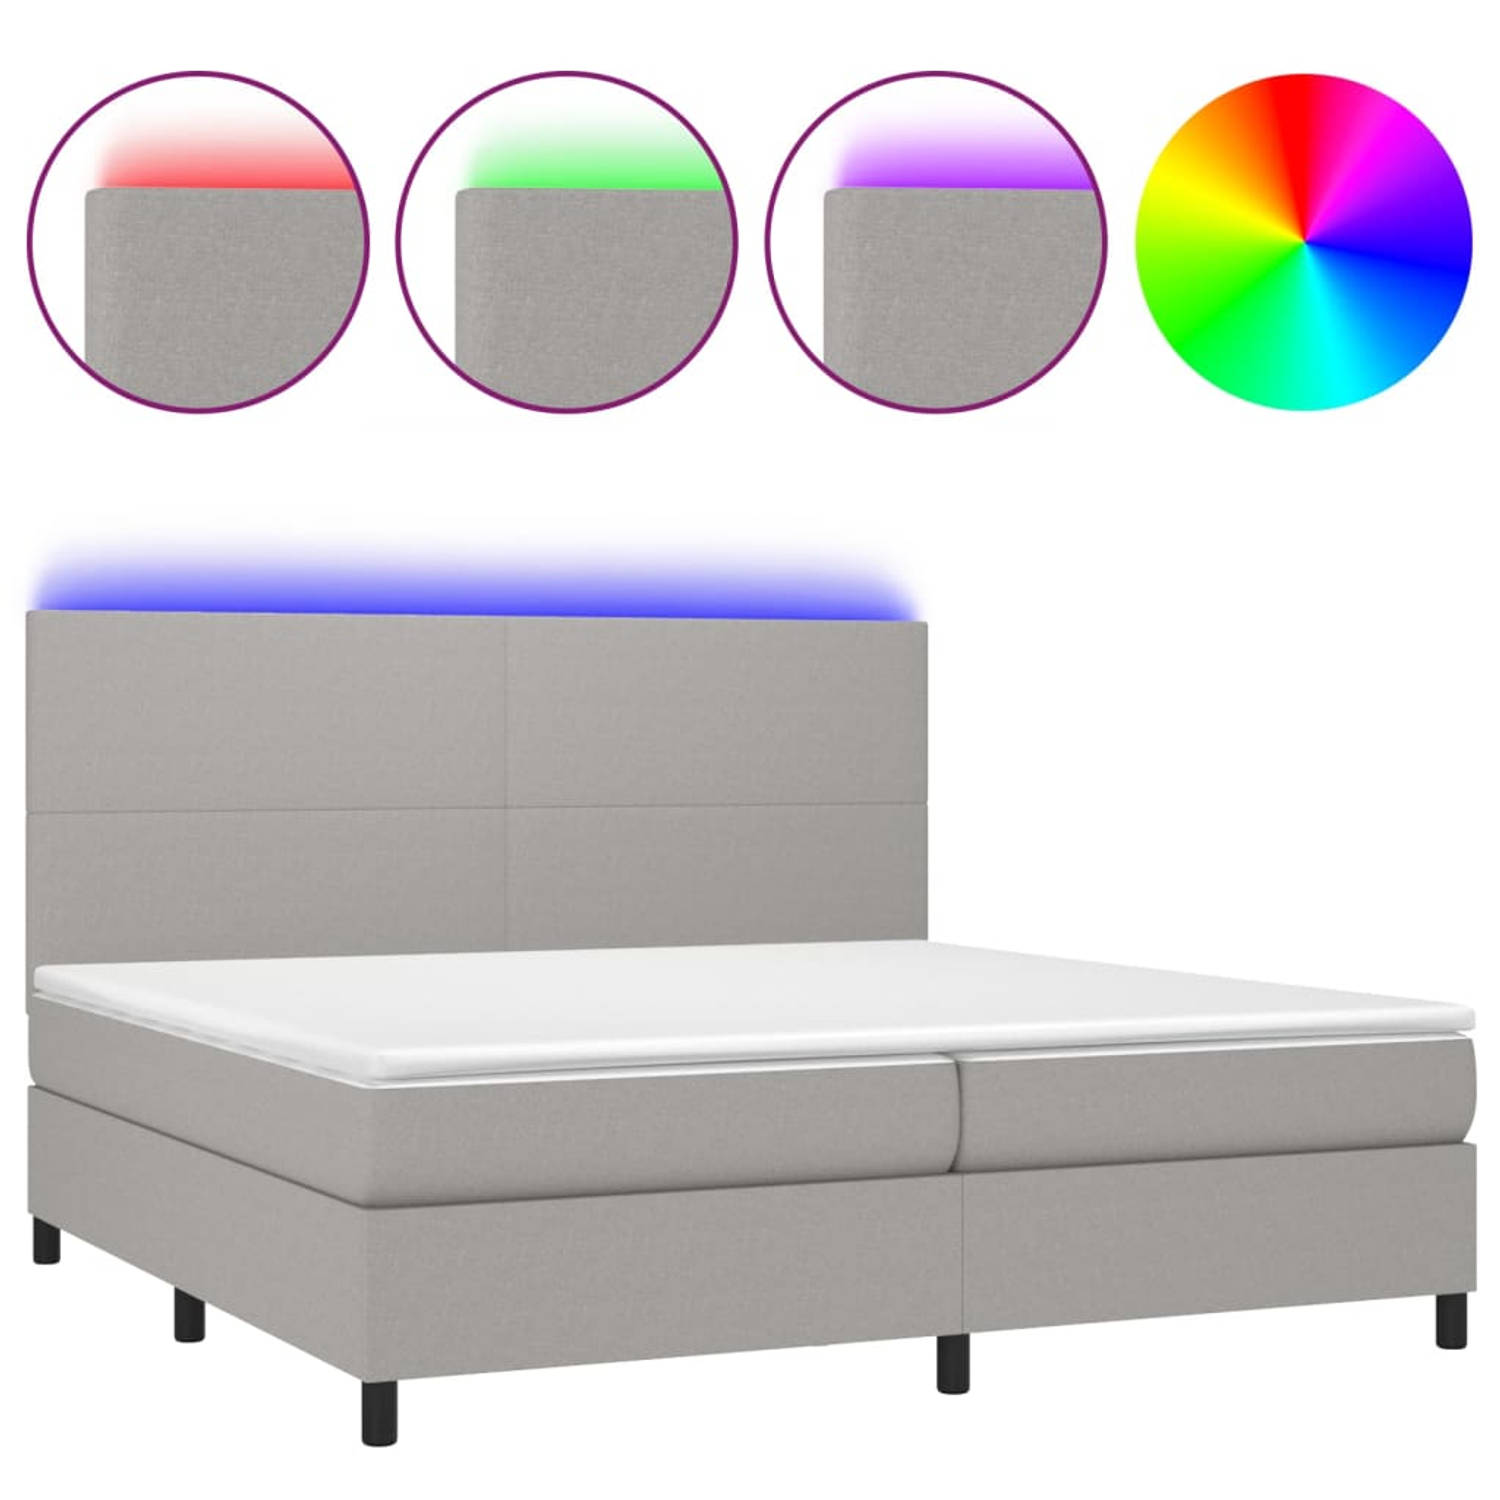 The Living Store Boxspring met matras en LED stof lichtgrijs 200x200 cm - Boxspring - Boxsprings - Bed - Slaapmeubel - Boxspringbed - Boxspring Bed - Tweepersoonsbed - Bed Met Matr